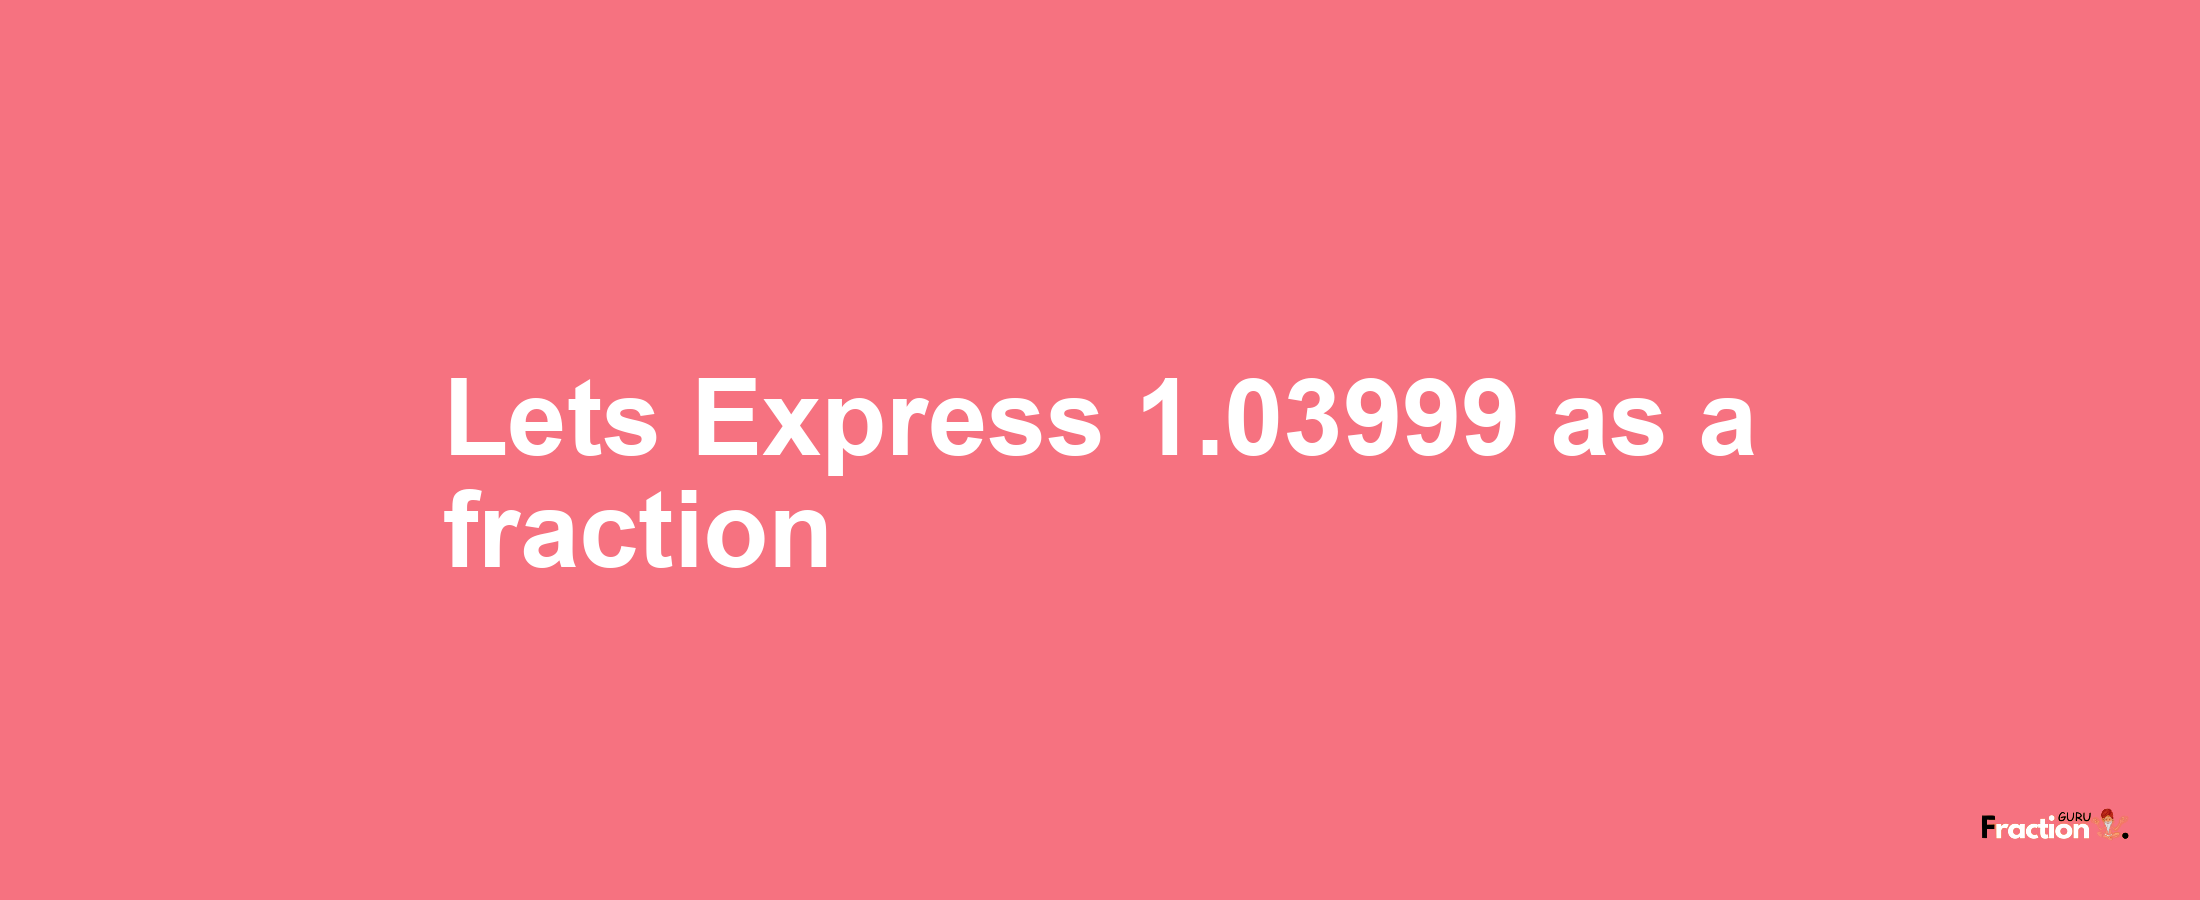 Lets Express 1.03999 as afraction